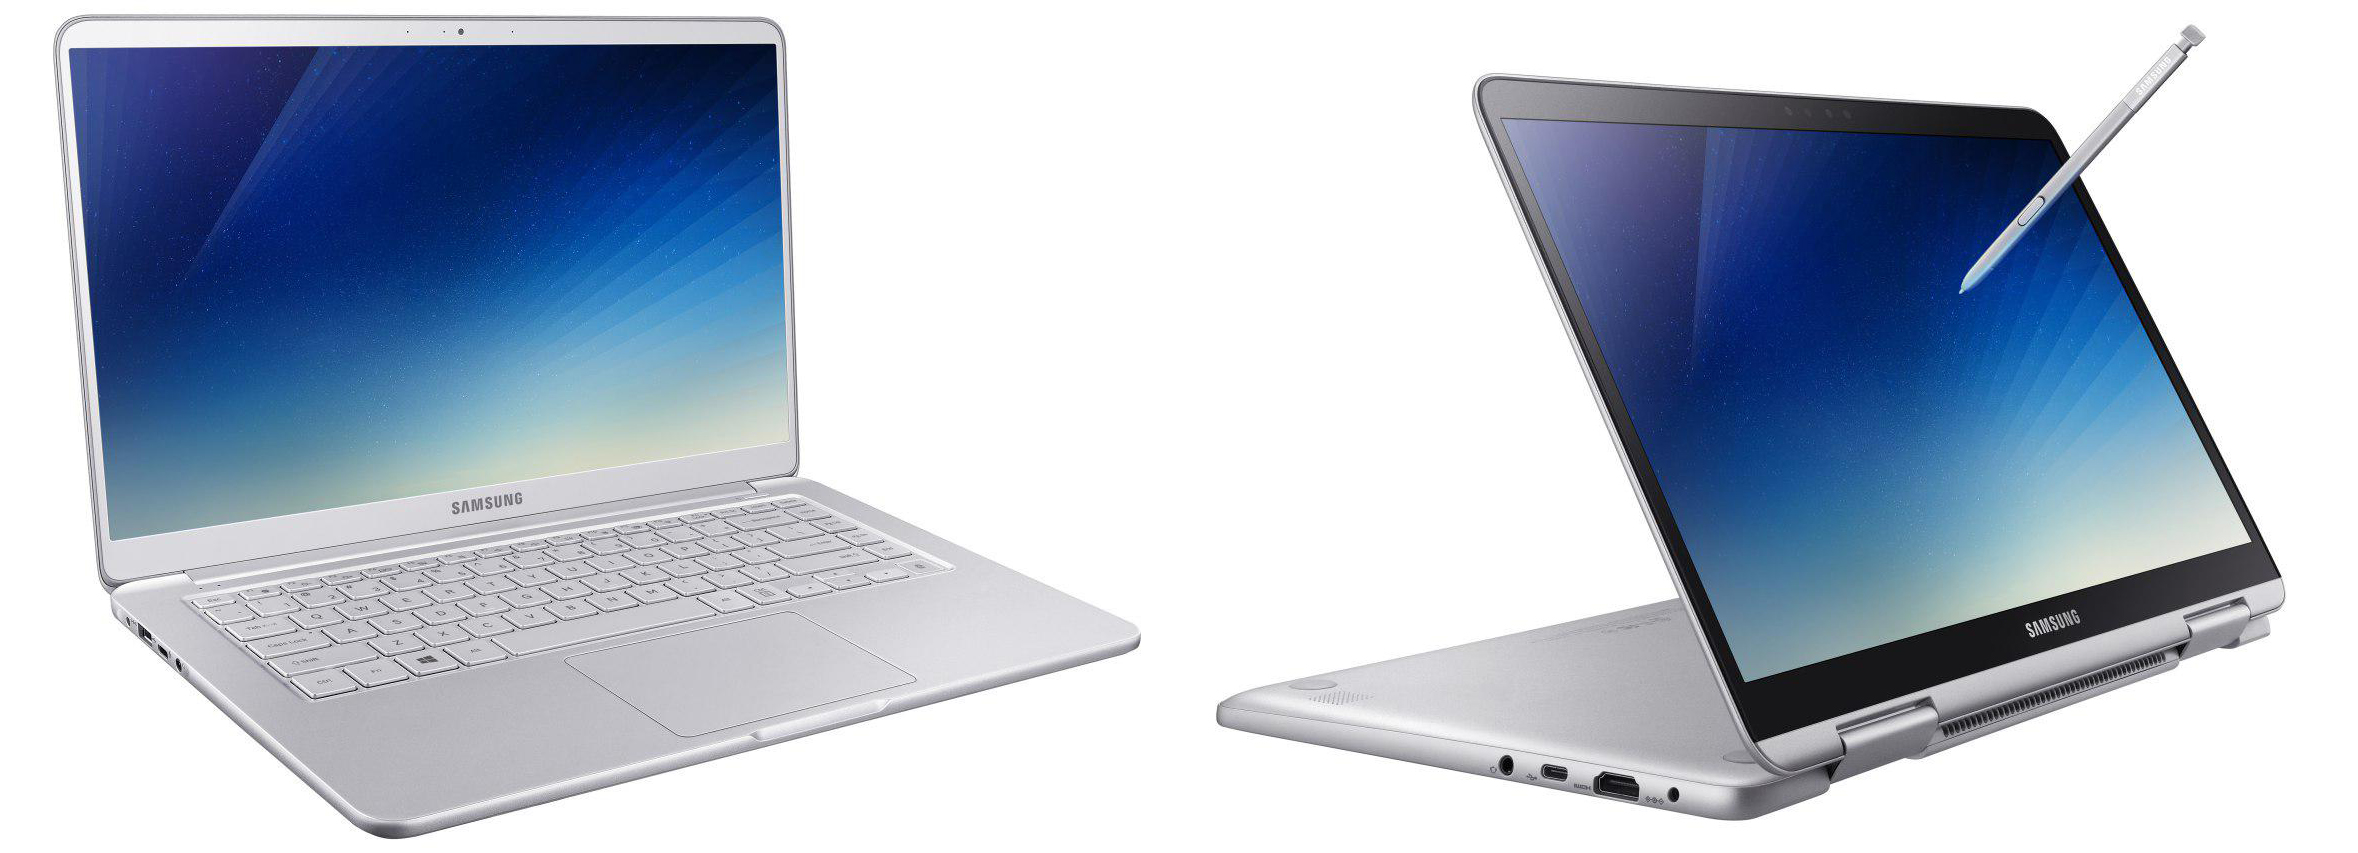 Samsung refreshes its Notebook 9 laptop line